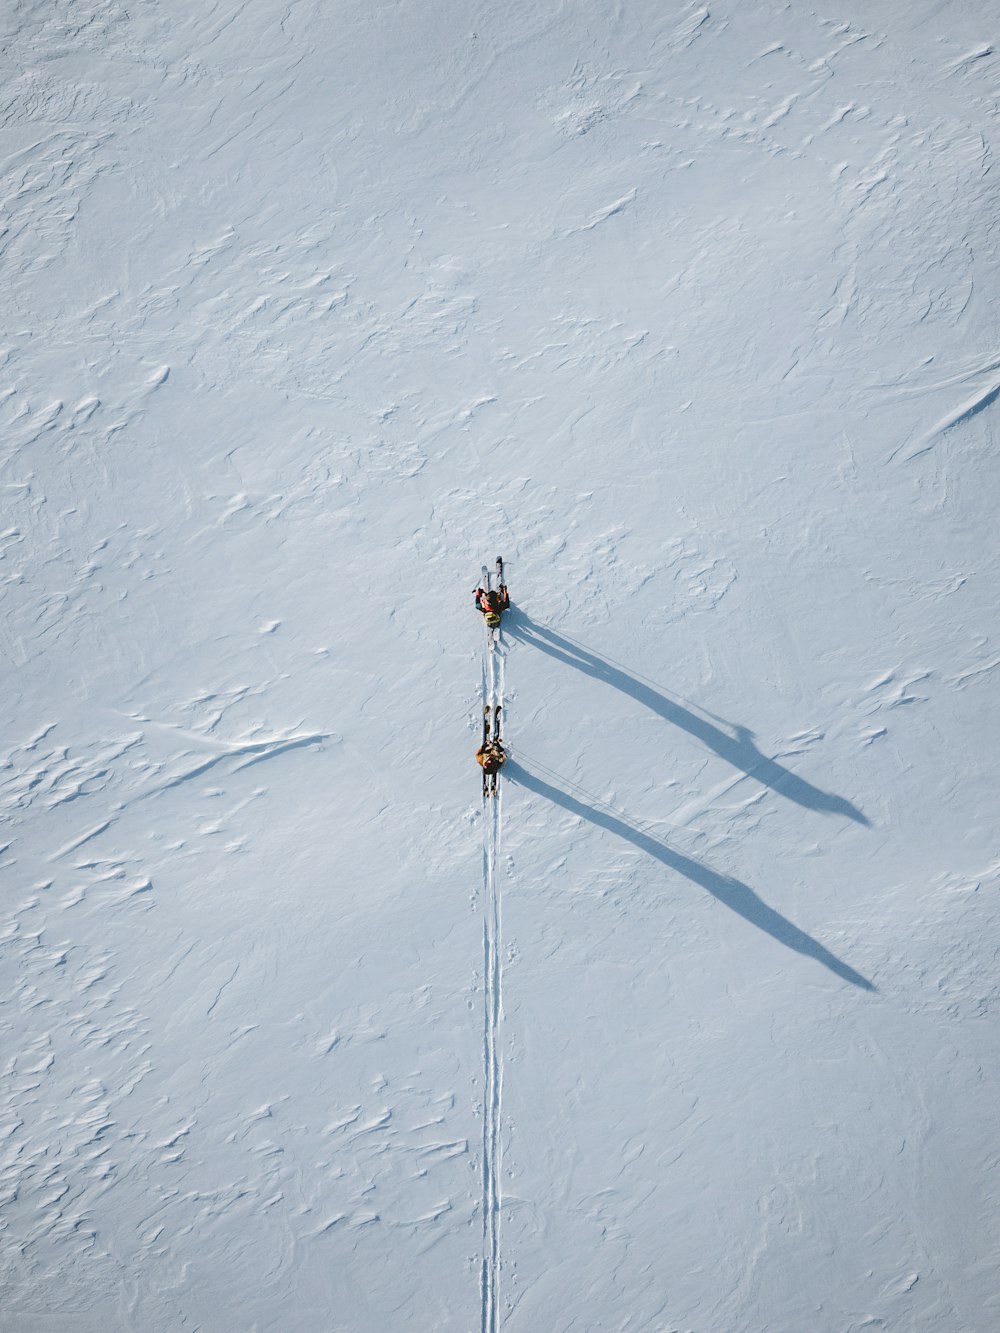 two people are skiing down a snowy hill